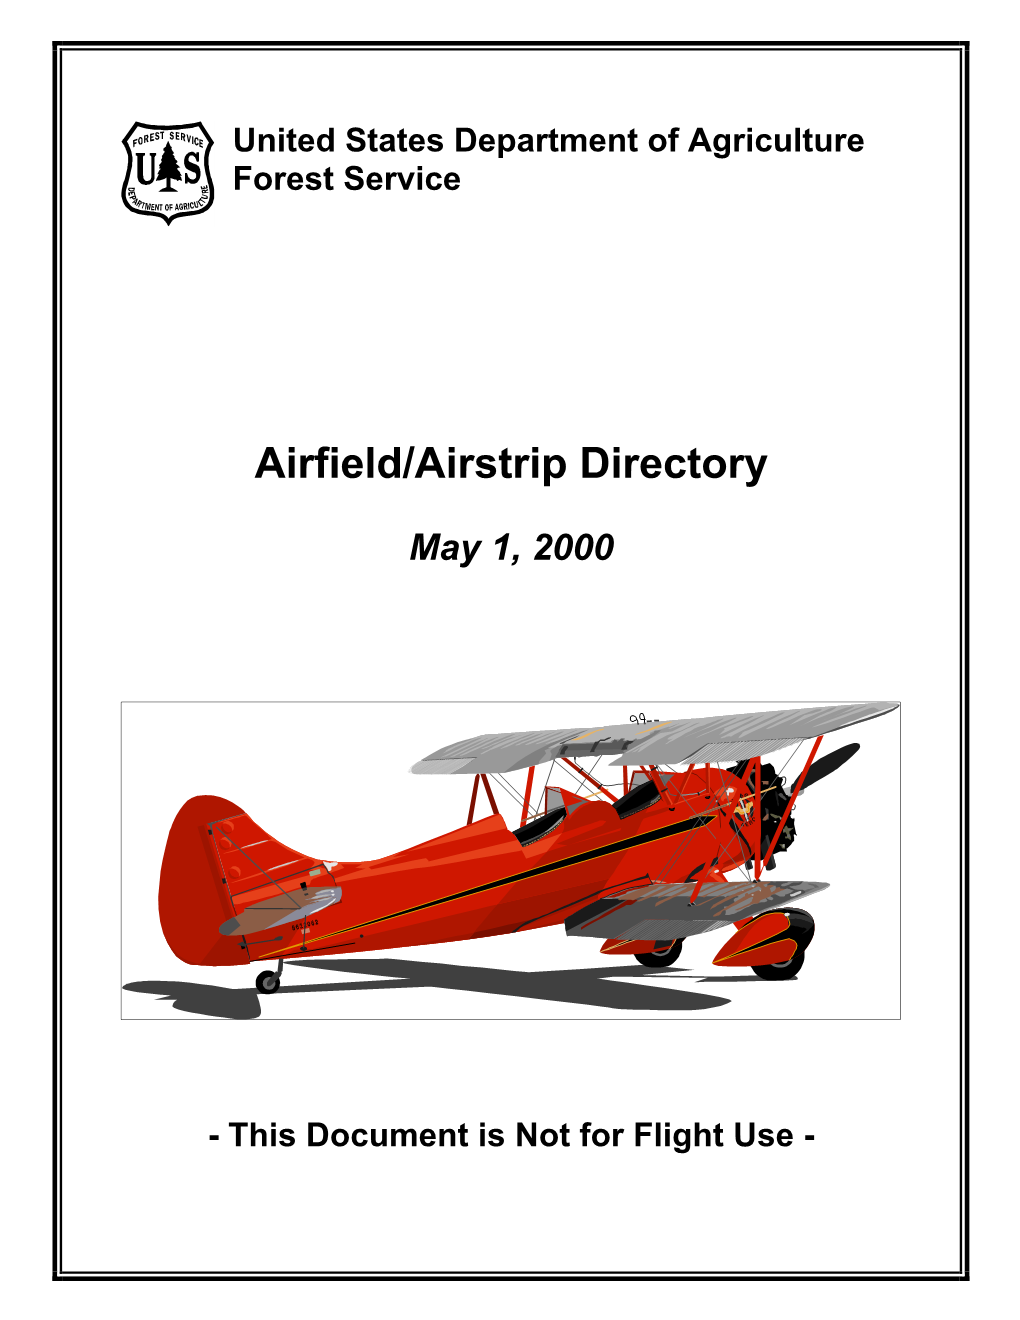 Airfield/Airstrip Directory